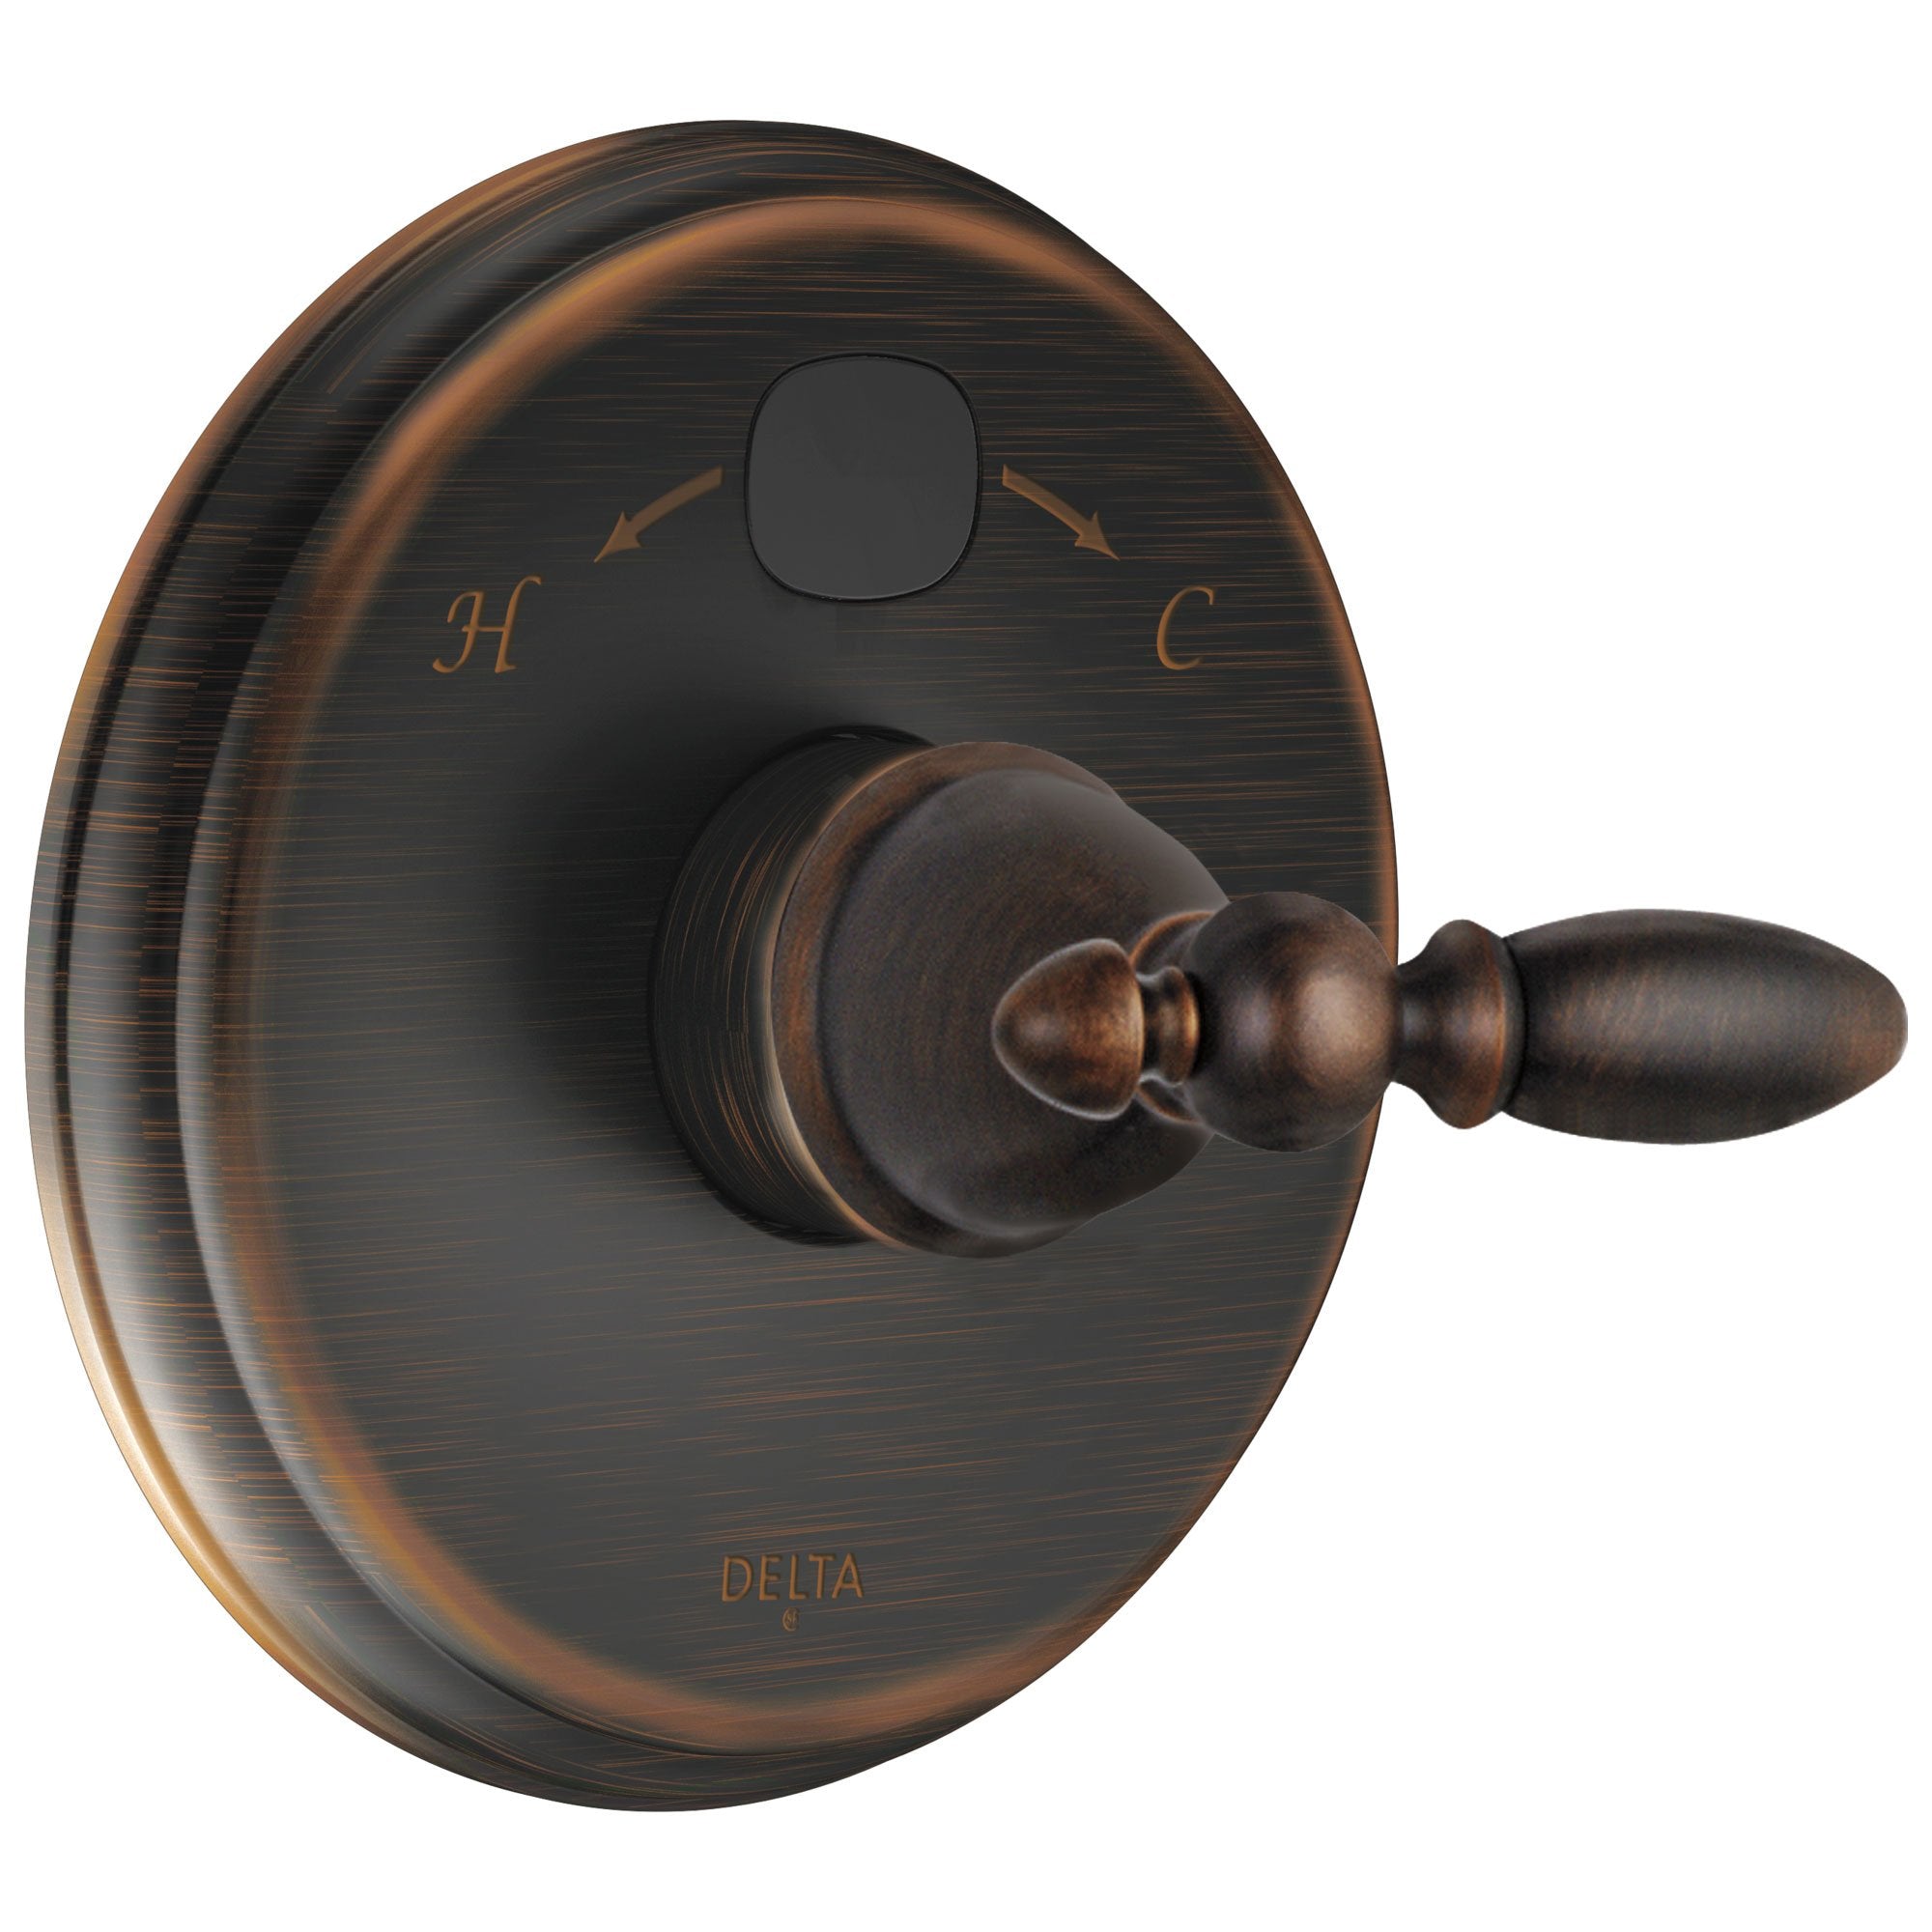 Delta Venetian Bronze Victorian 14 Series Digital Display Temp2O Shower Valve Control COMPLETE with Single Lever Handle and Rough-in Valve with Stops D1678V